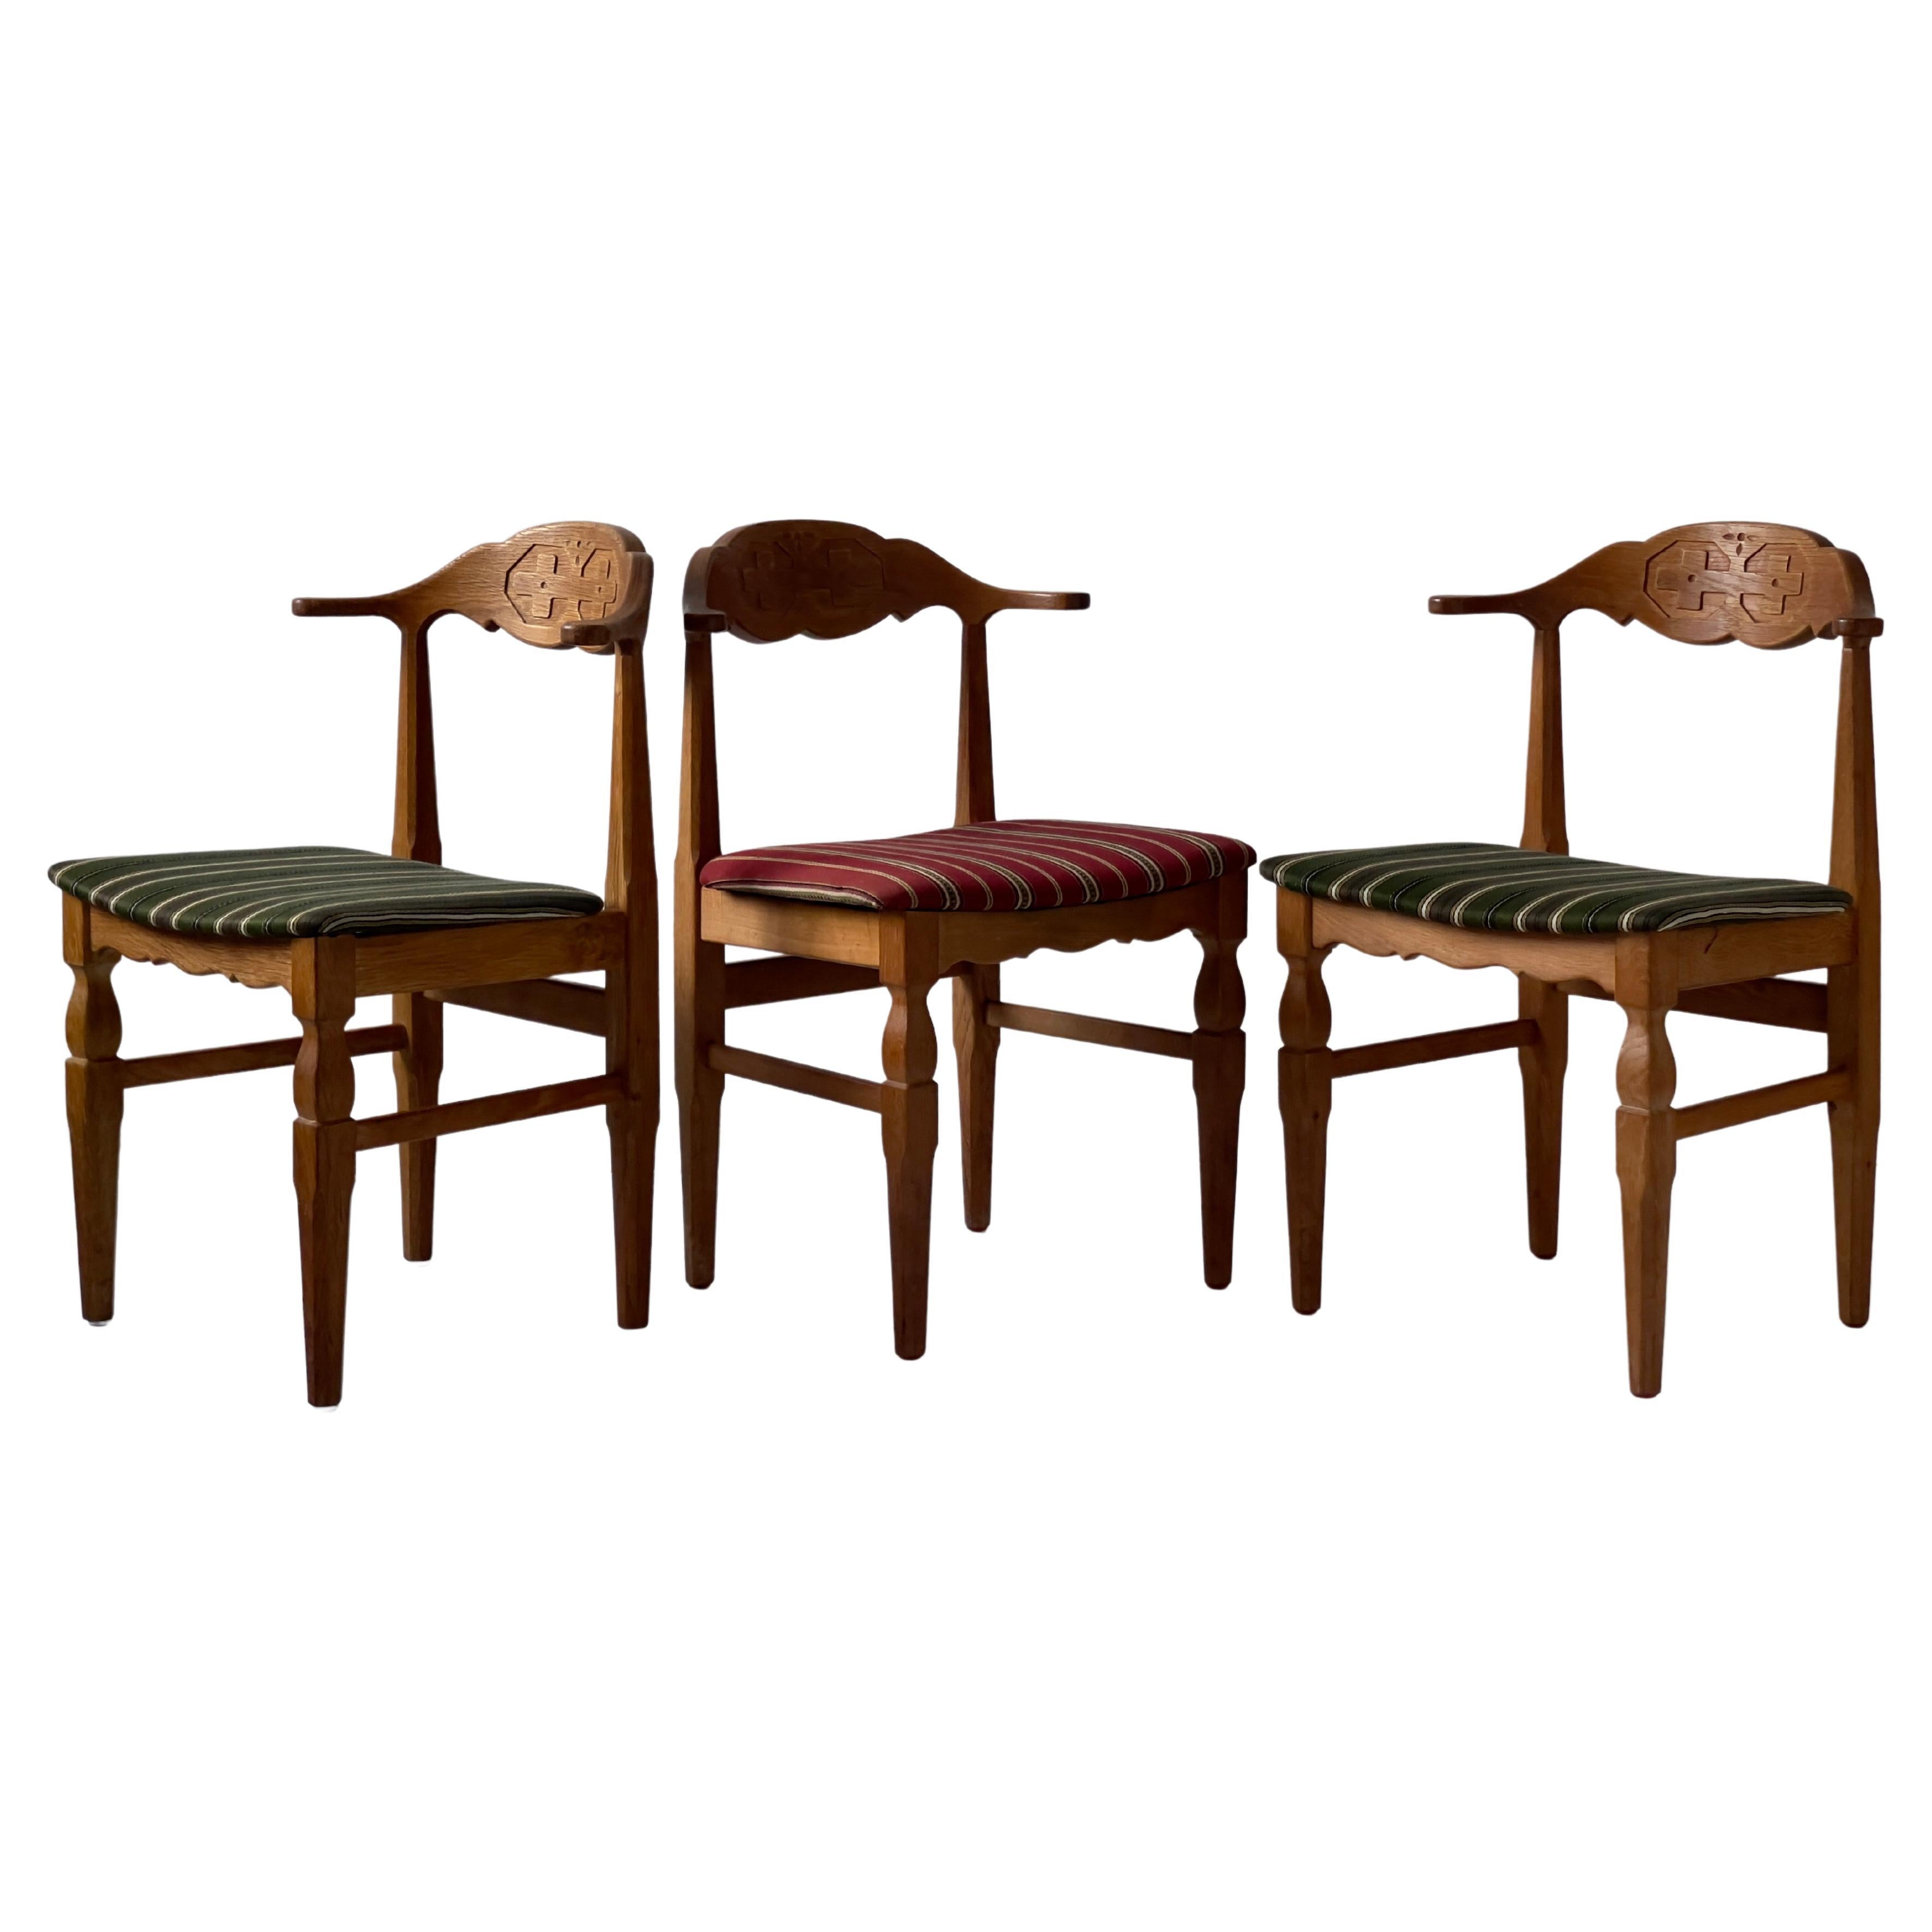 3 Original Henning Kjærnulf Dining Chairs in Solid Oak and Wool Fabric 1970s For Sale